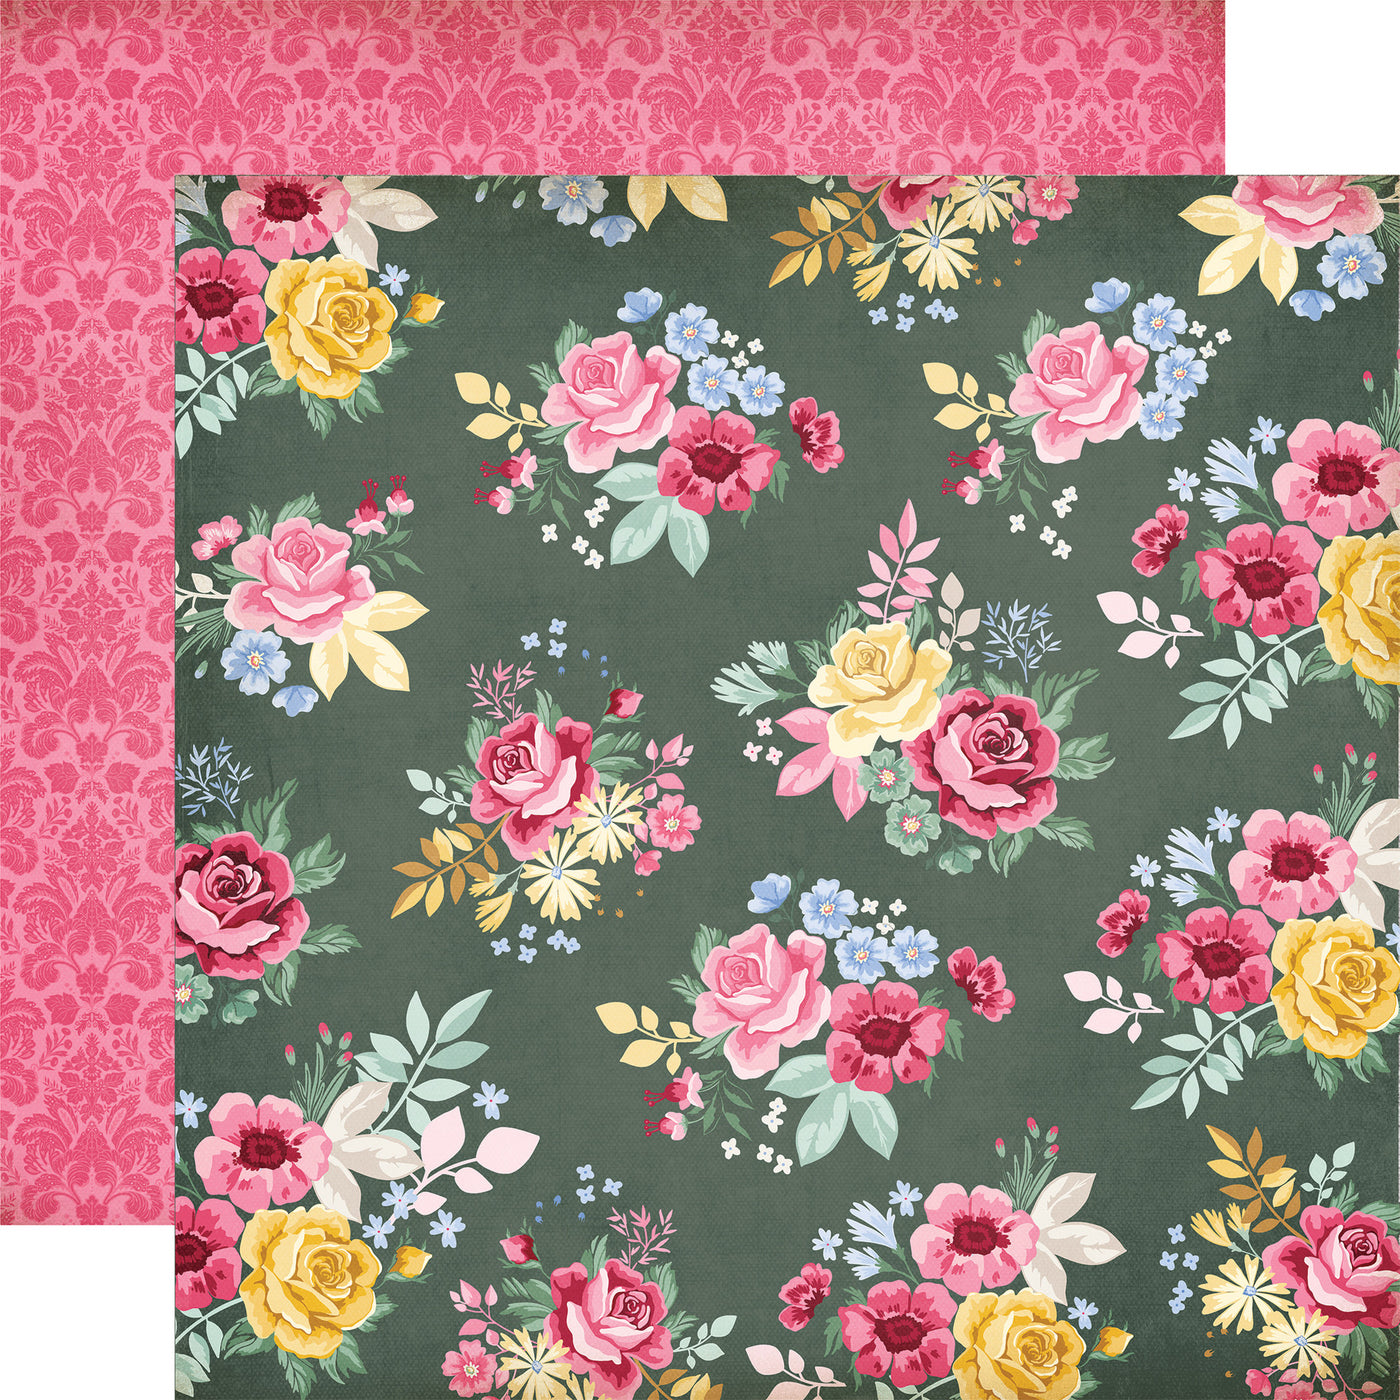 Double-sided 12x12 Floral sprays on a dark green background. The reverse is a pink damask on a pink background. 80 lb cover—felt texture.